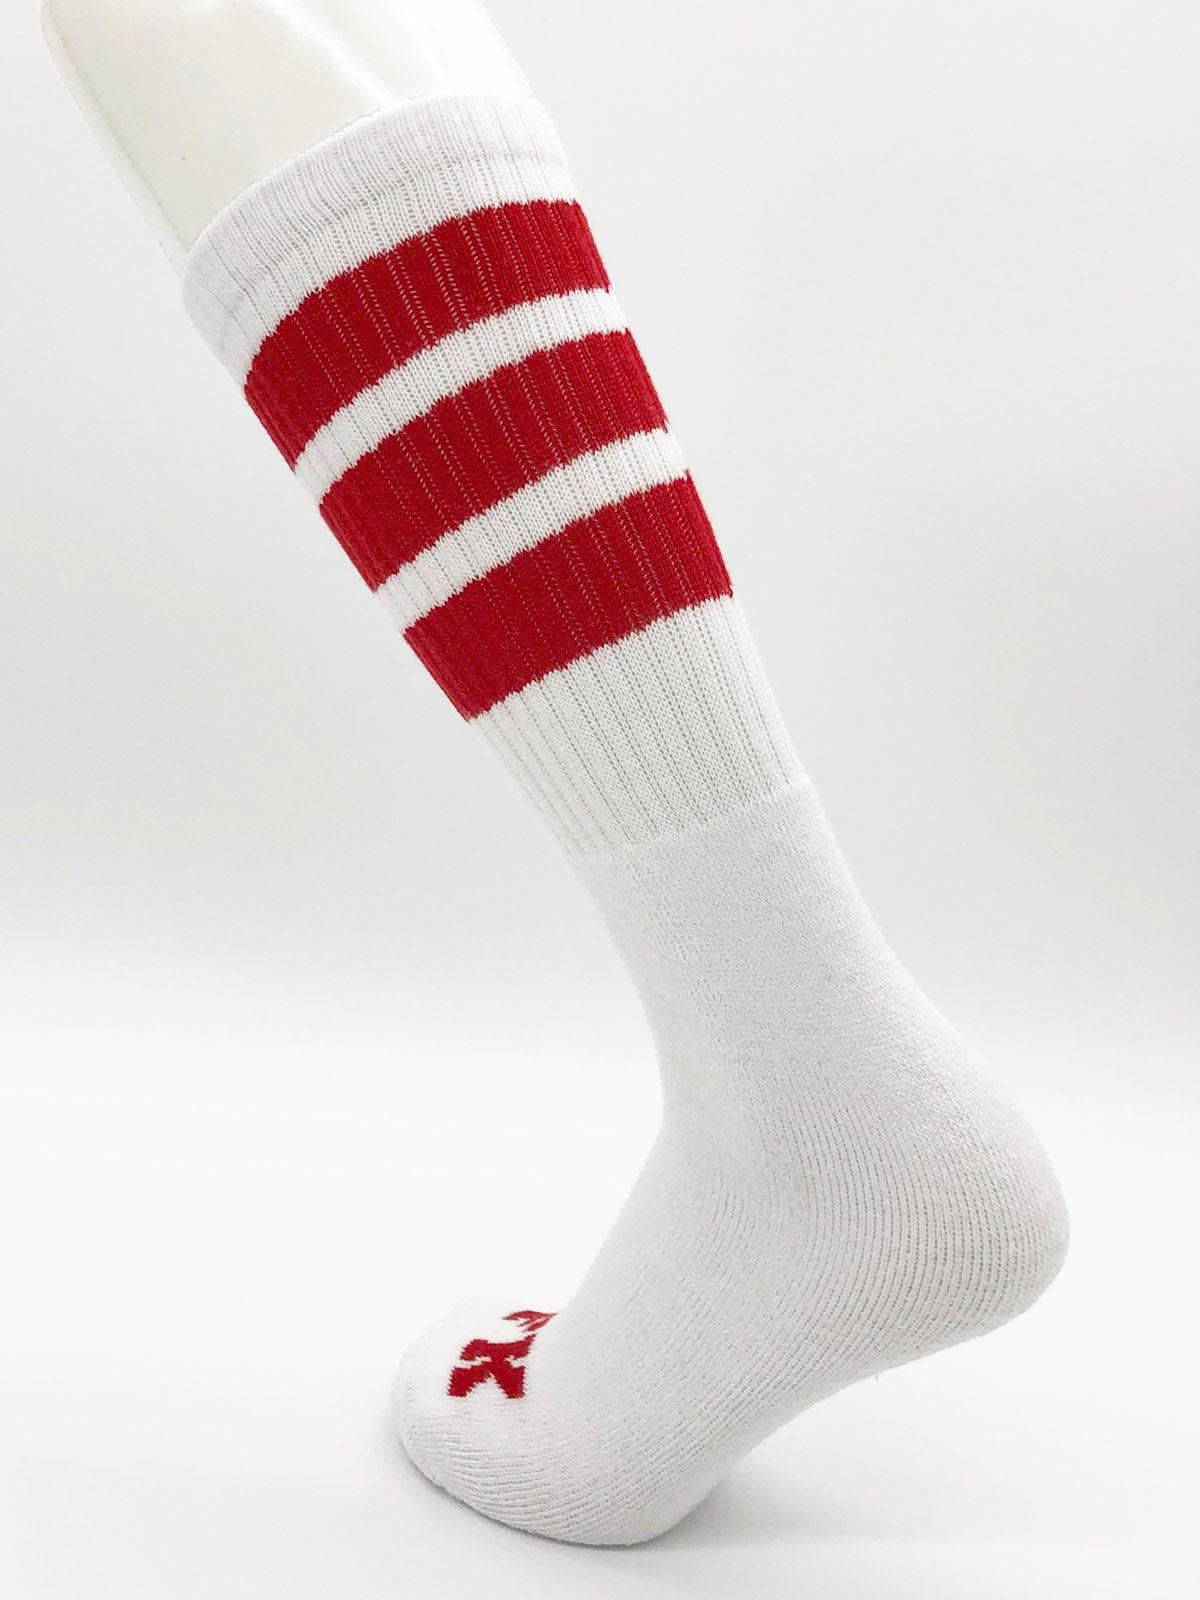 Athletic Knee High Striped Tube Socks in Blue and Red - The